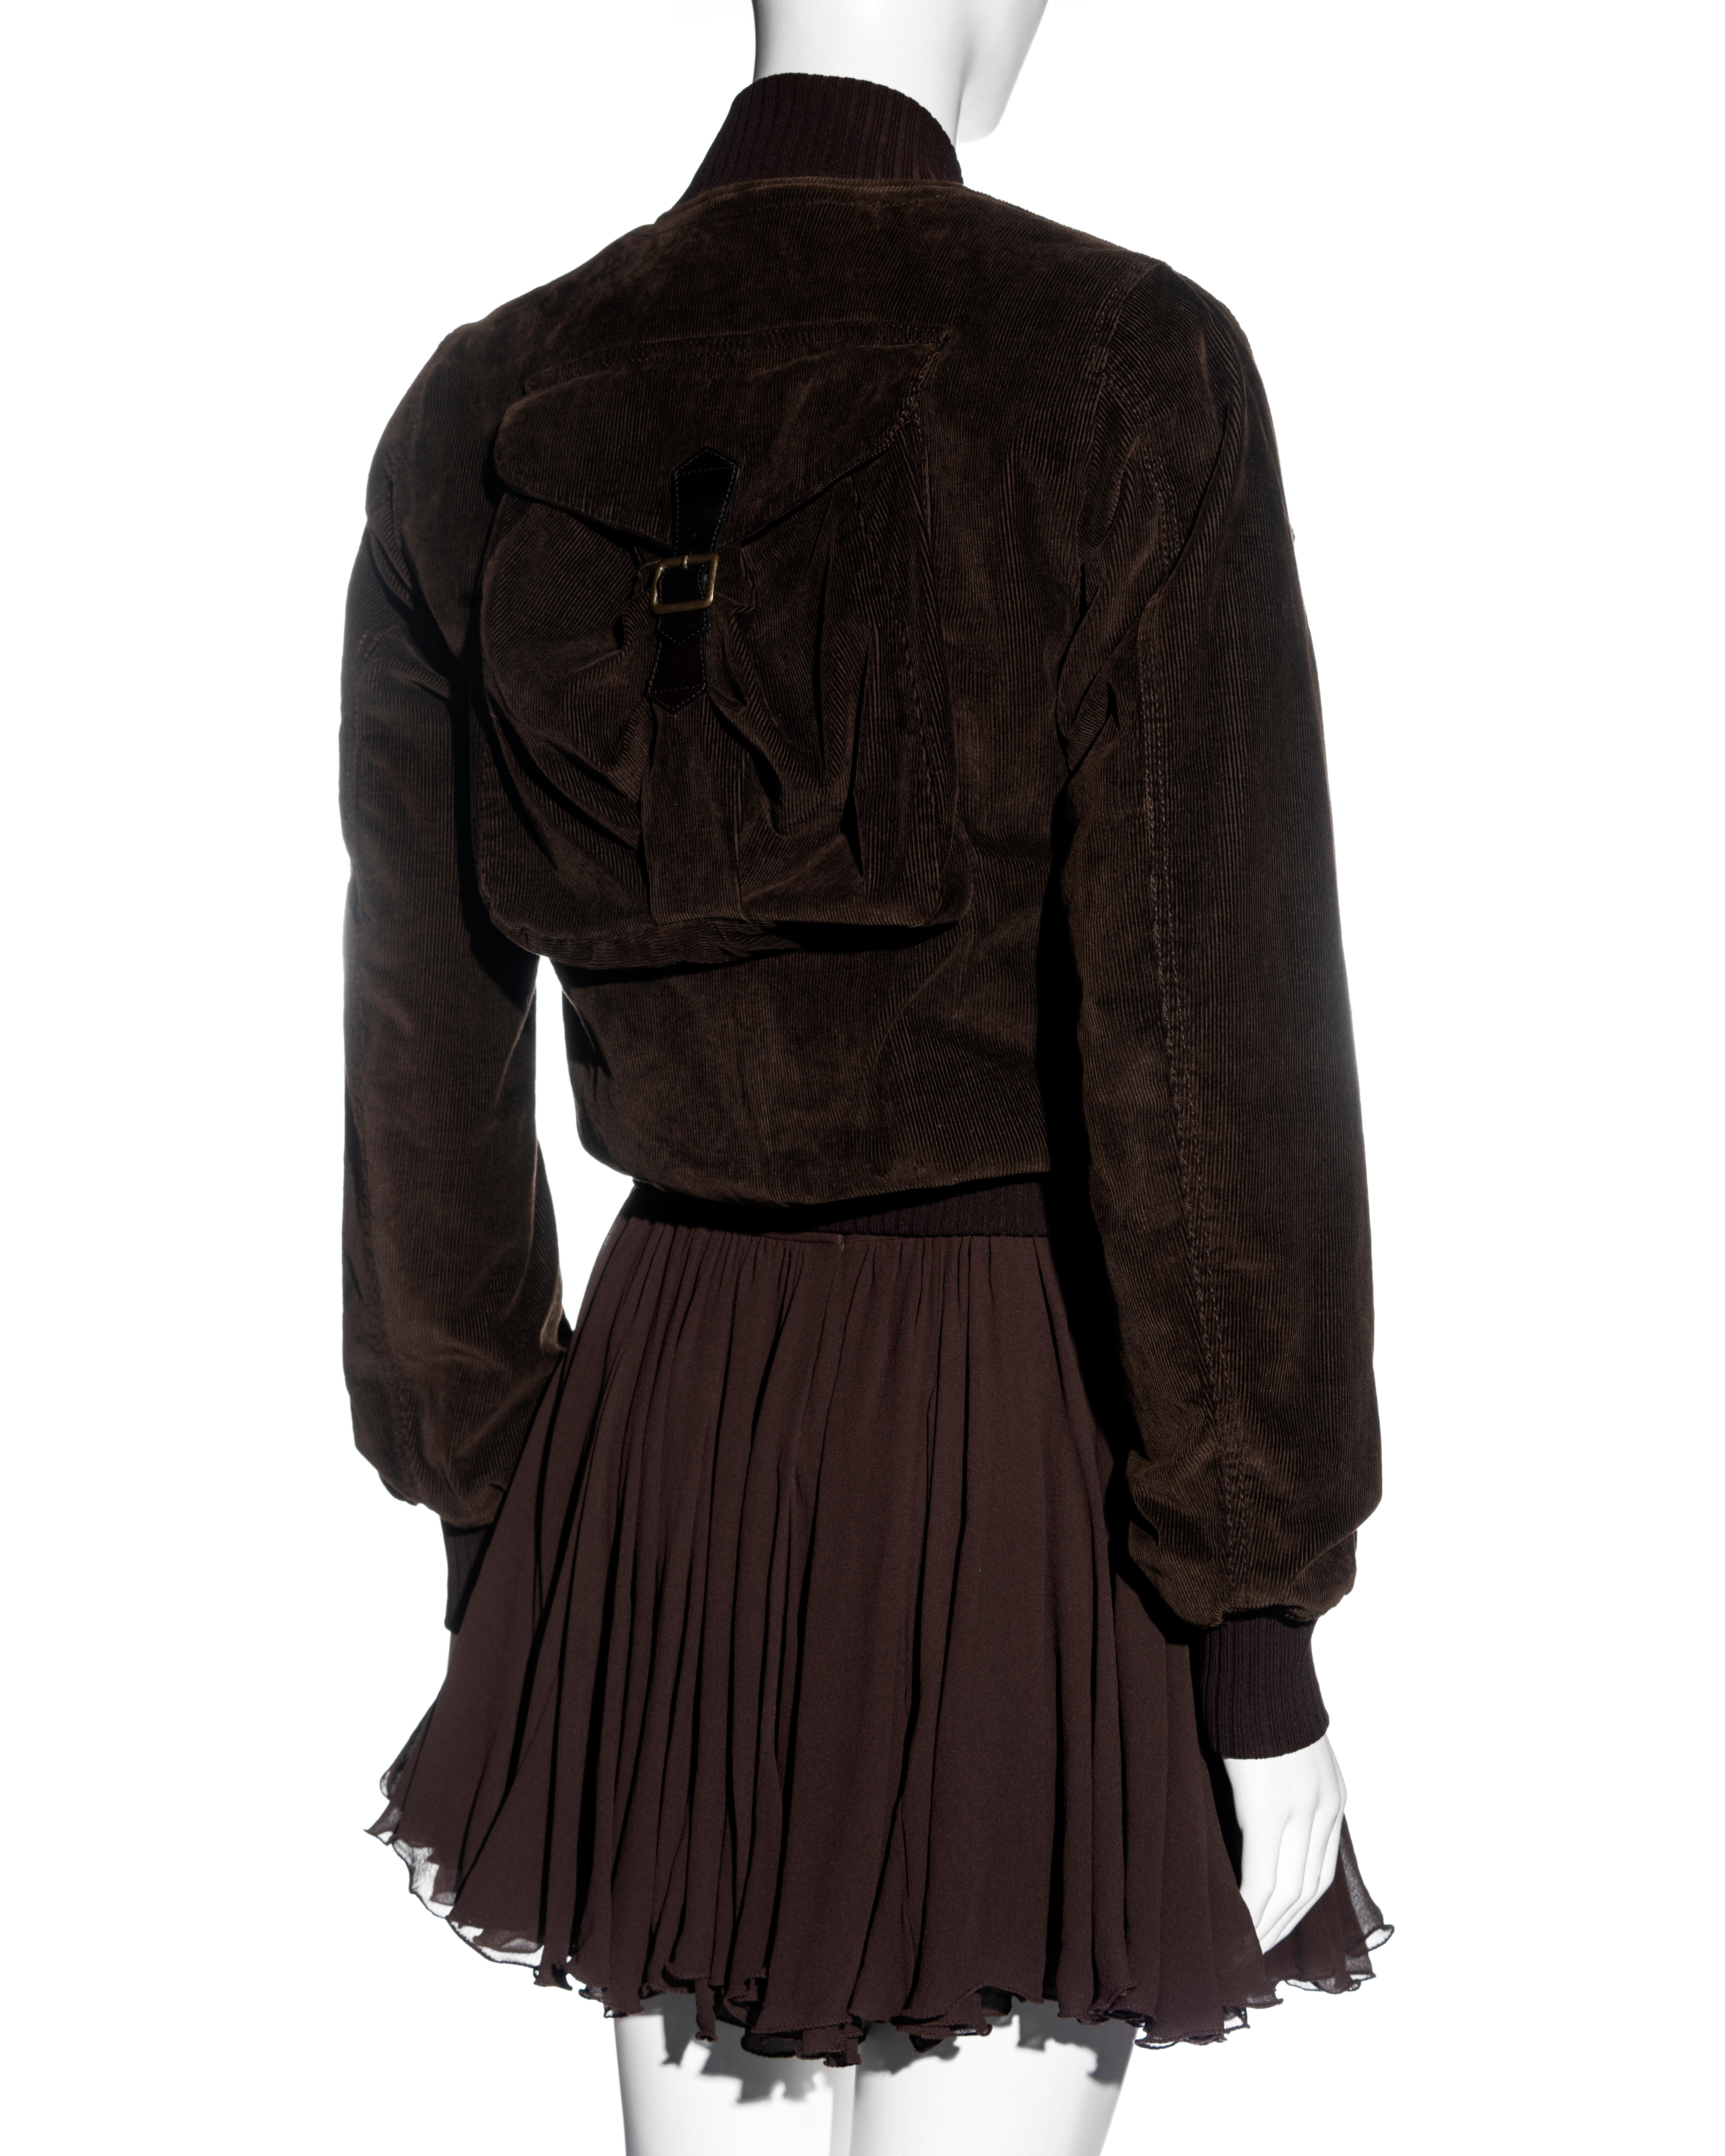 Dolce & Gabbana brown corduroy multipocket jacket and mini skirt set, fw 2002 For Sale 2